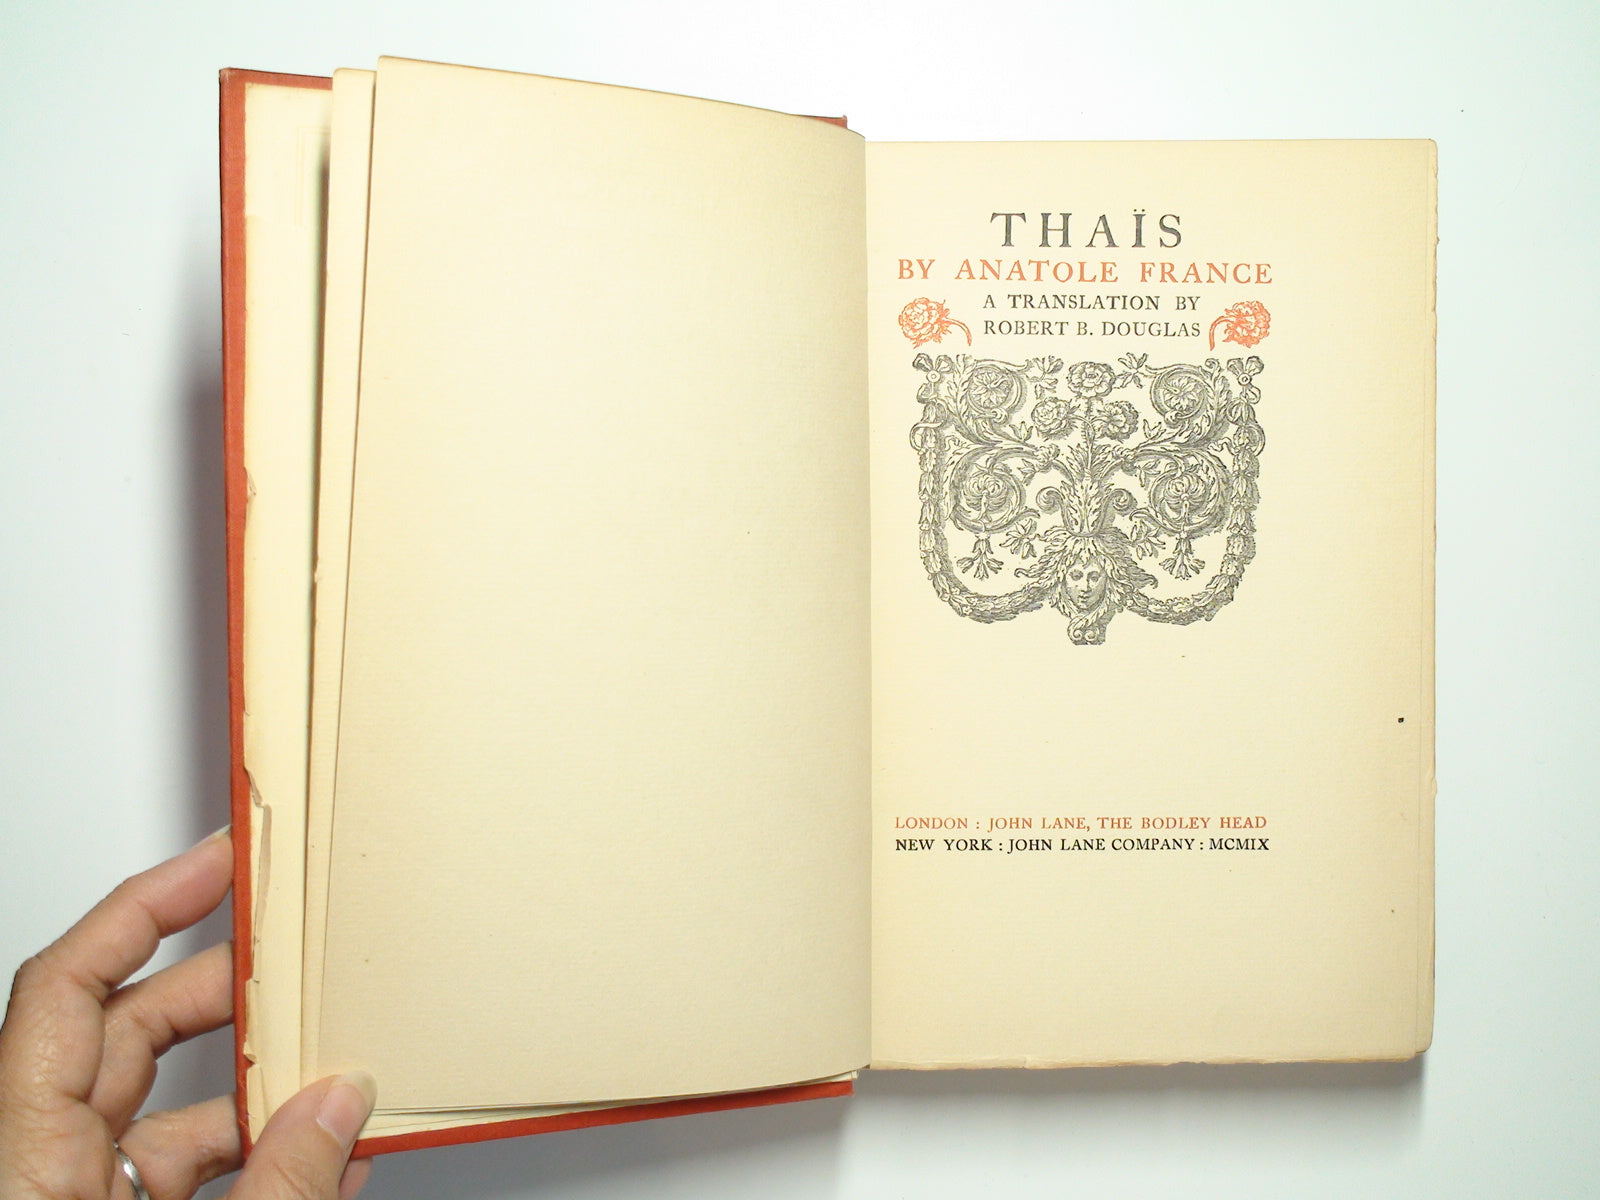 Thais by Anatole France, Translated by Robert B. Douglas, 1909